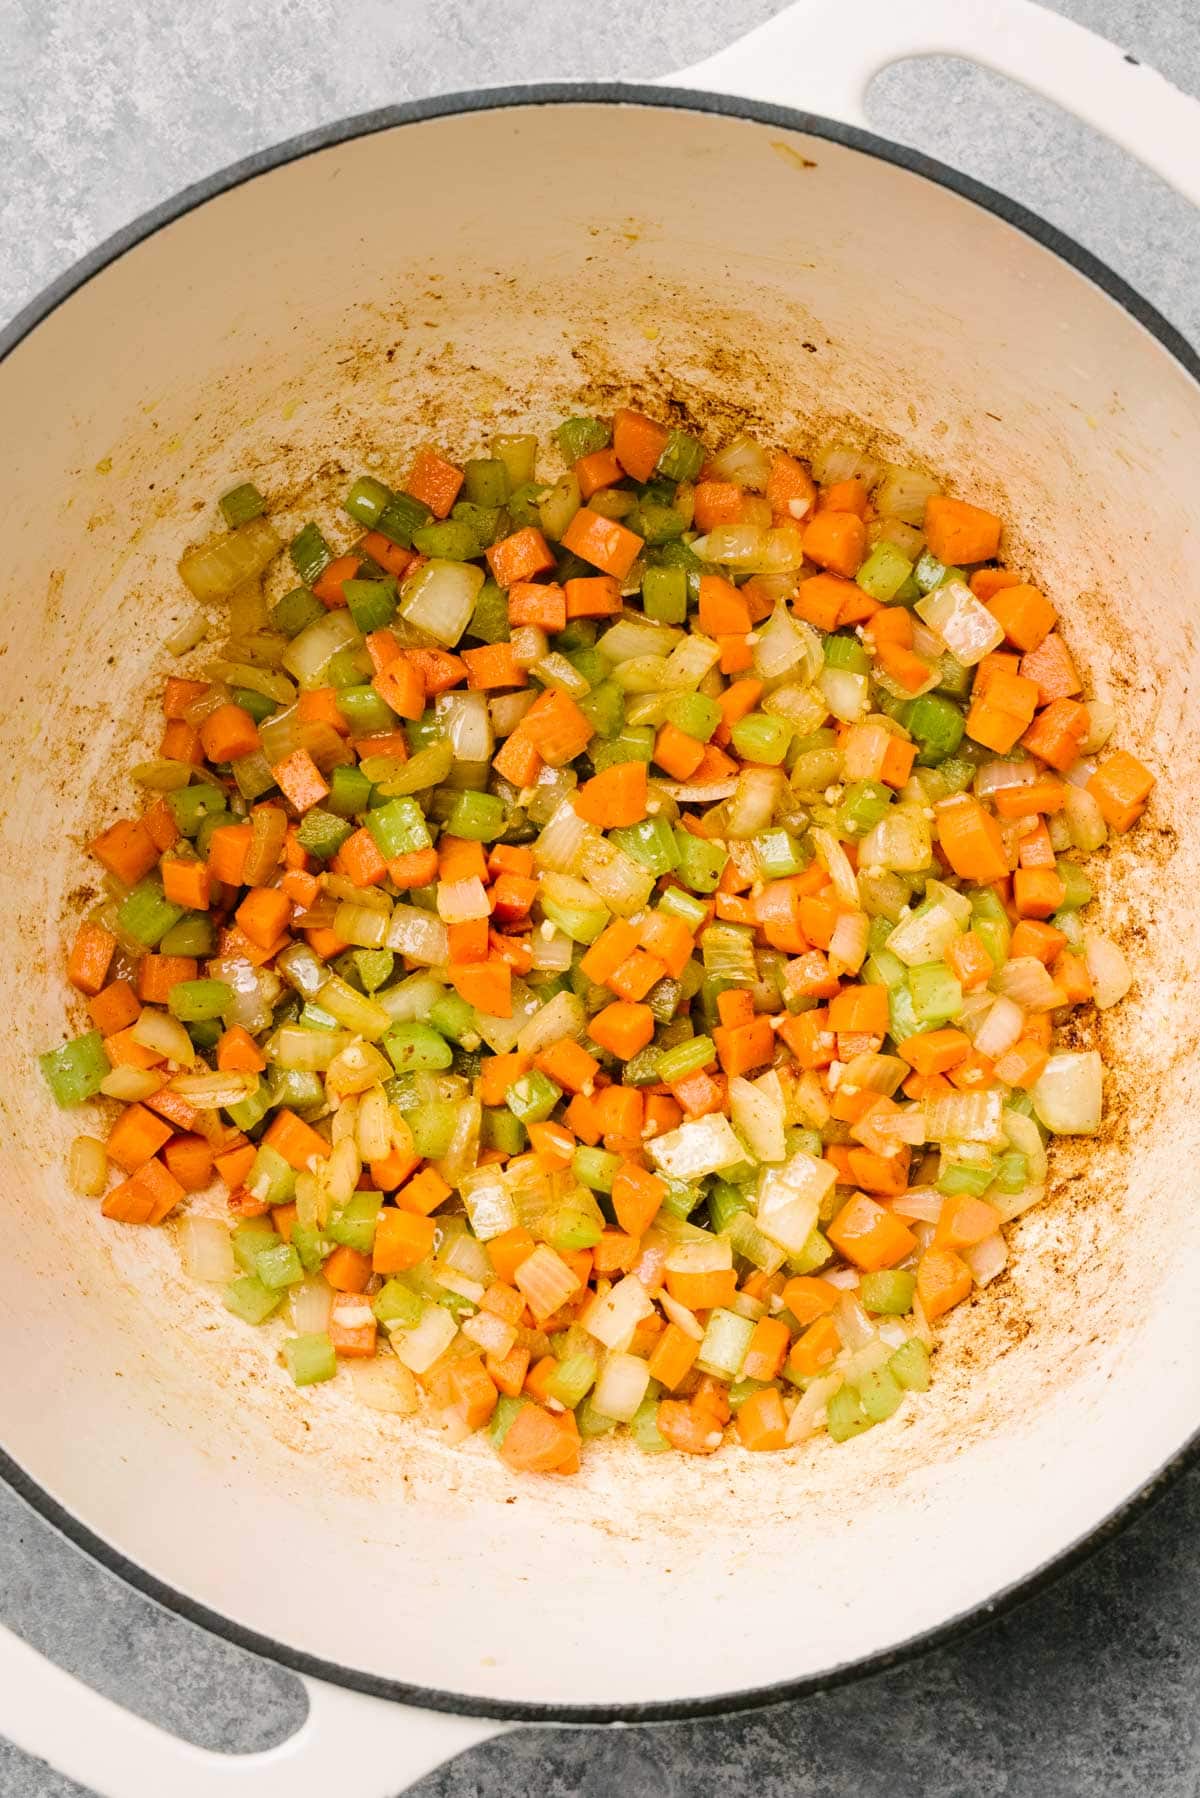 Sautéed onions, carrots, celery, and garlic in a white dutch oven.